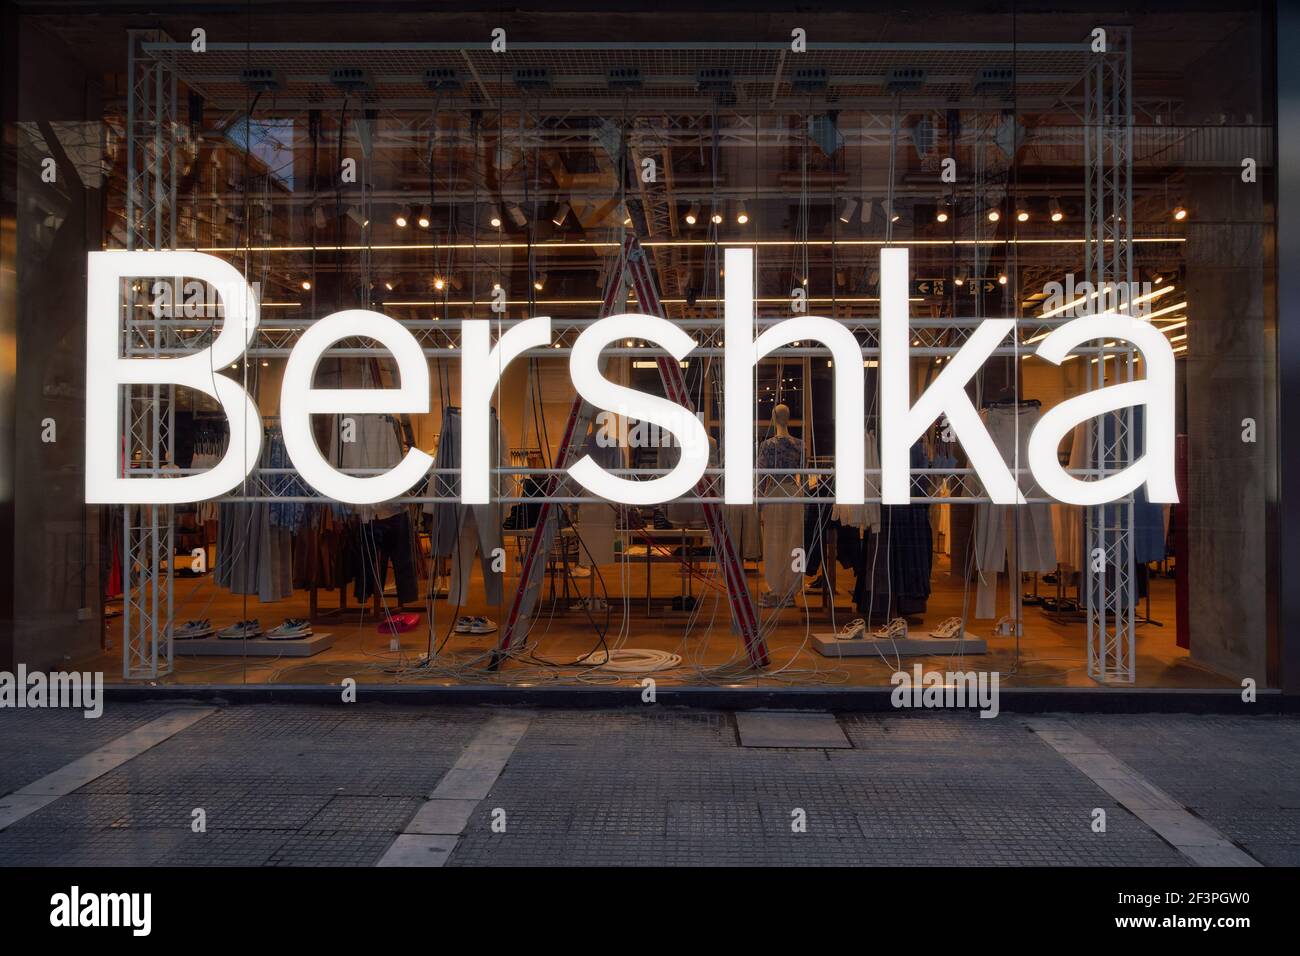 Bershka retailer store exterior with logo.Spanish clothes & accessories brand by Inditex, trading worldwide store with clothing in Thessaloniki Greece Stock Photo